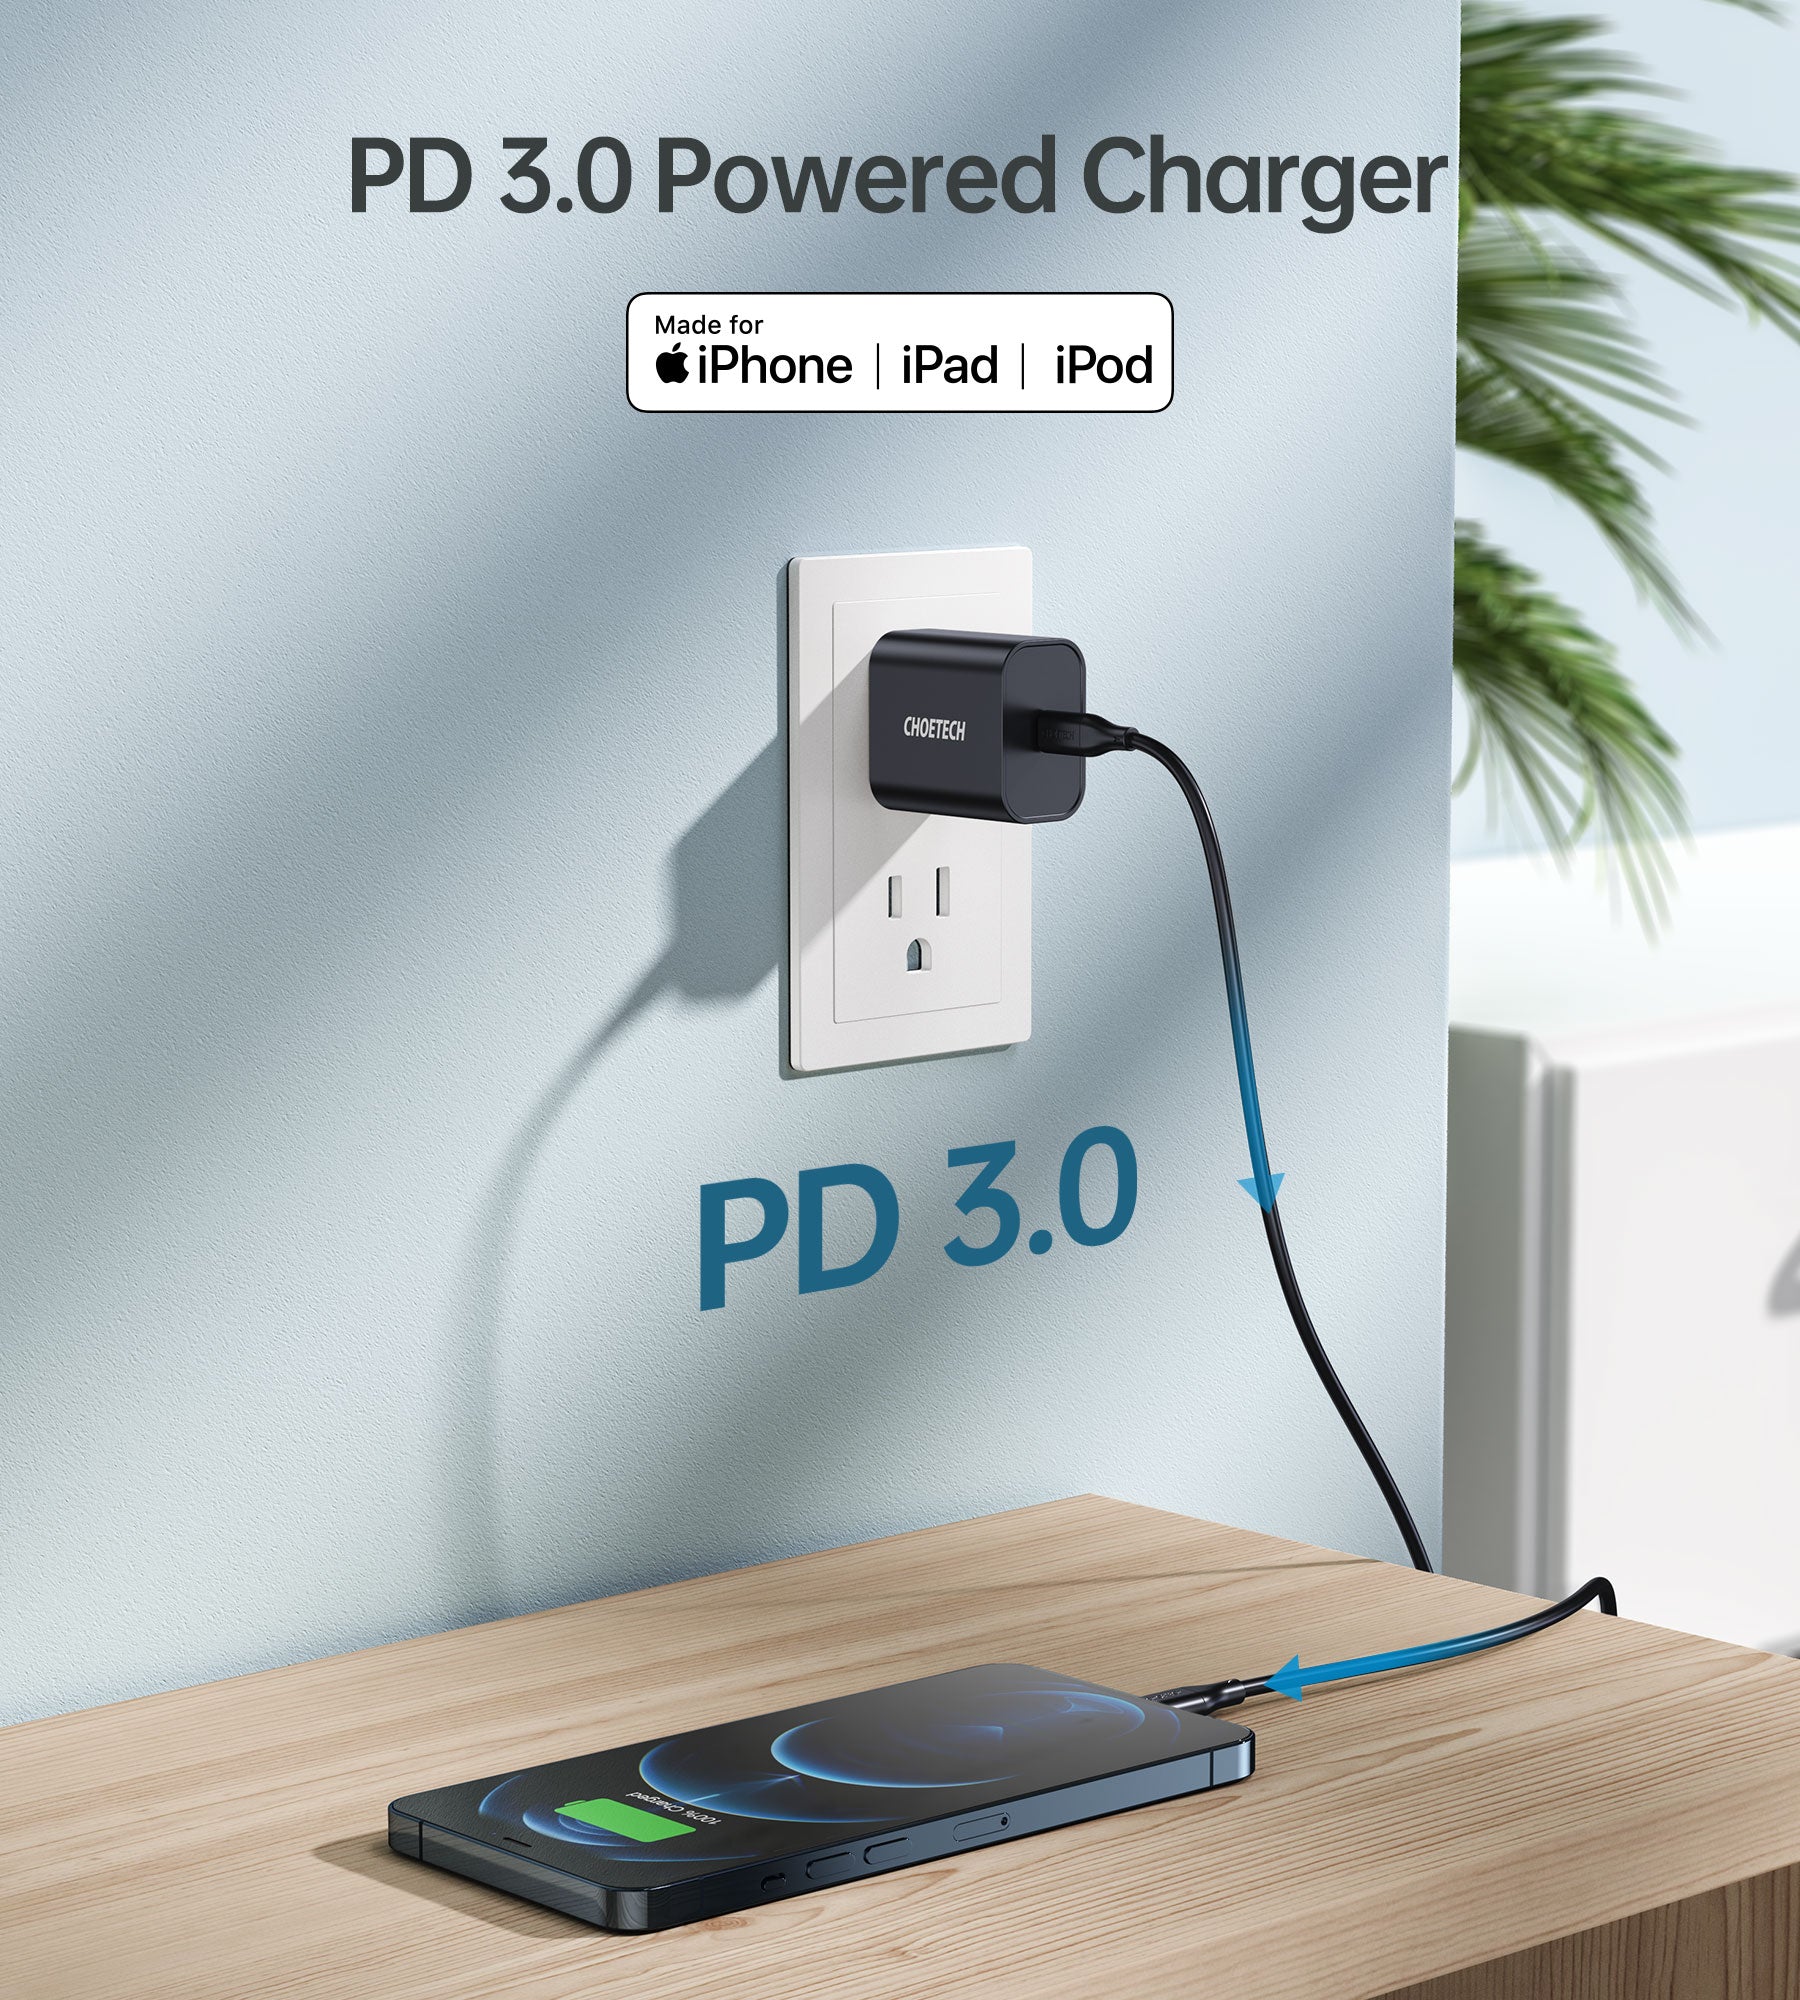 MIX00122 Chargeur USB C, CHOETECH 2-Pack PD Fast Charger 20W Type C Power Delivery 3.0 Chargeur Mural Compatible pour iPhone 12/12 Pro Max/12 Pro/12 Mini/11 Pro Max/SE/XS/XR/8, iPad Pro, Galaxy S20/S10, Pixel 5/4